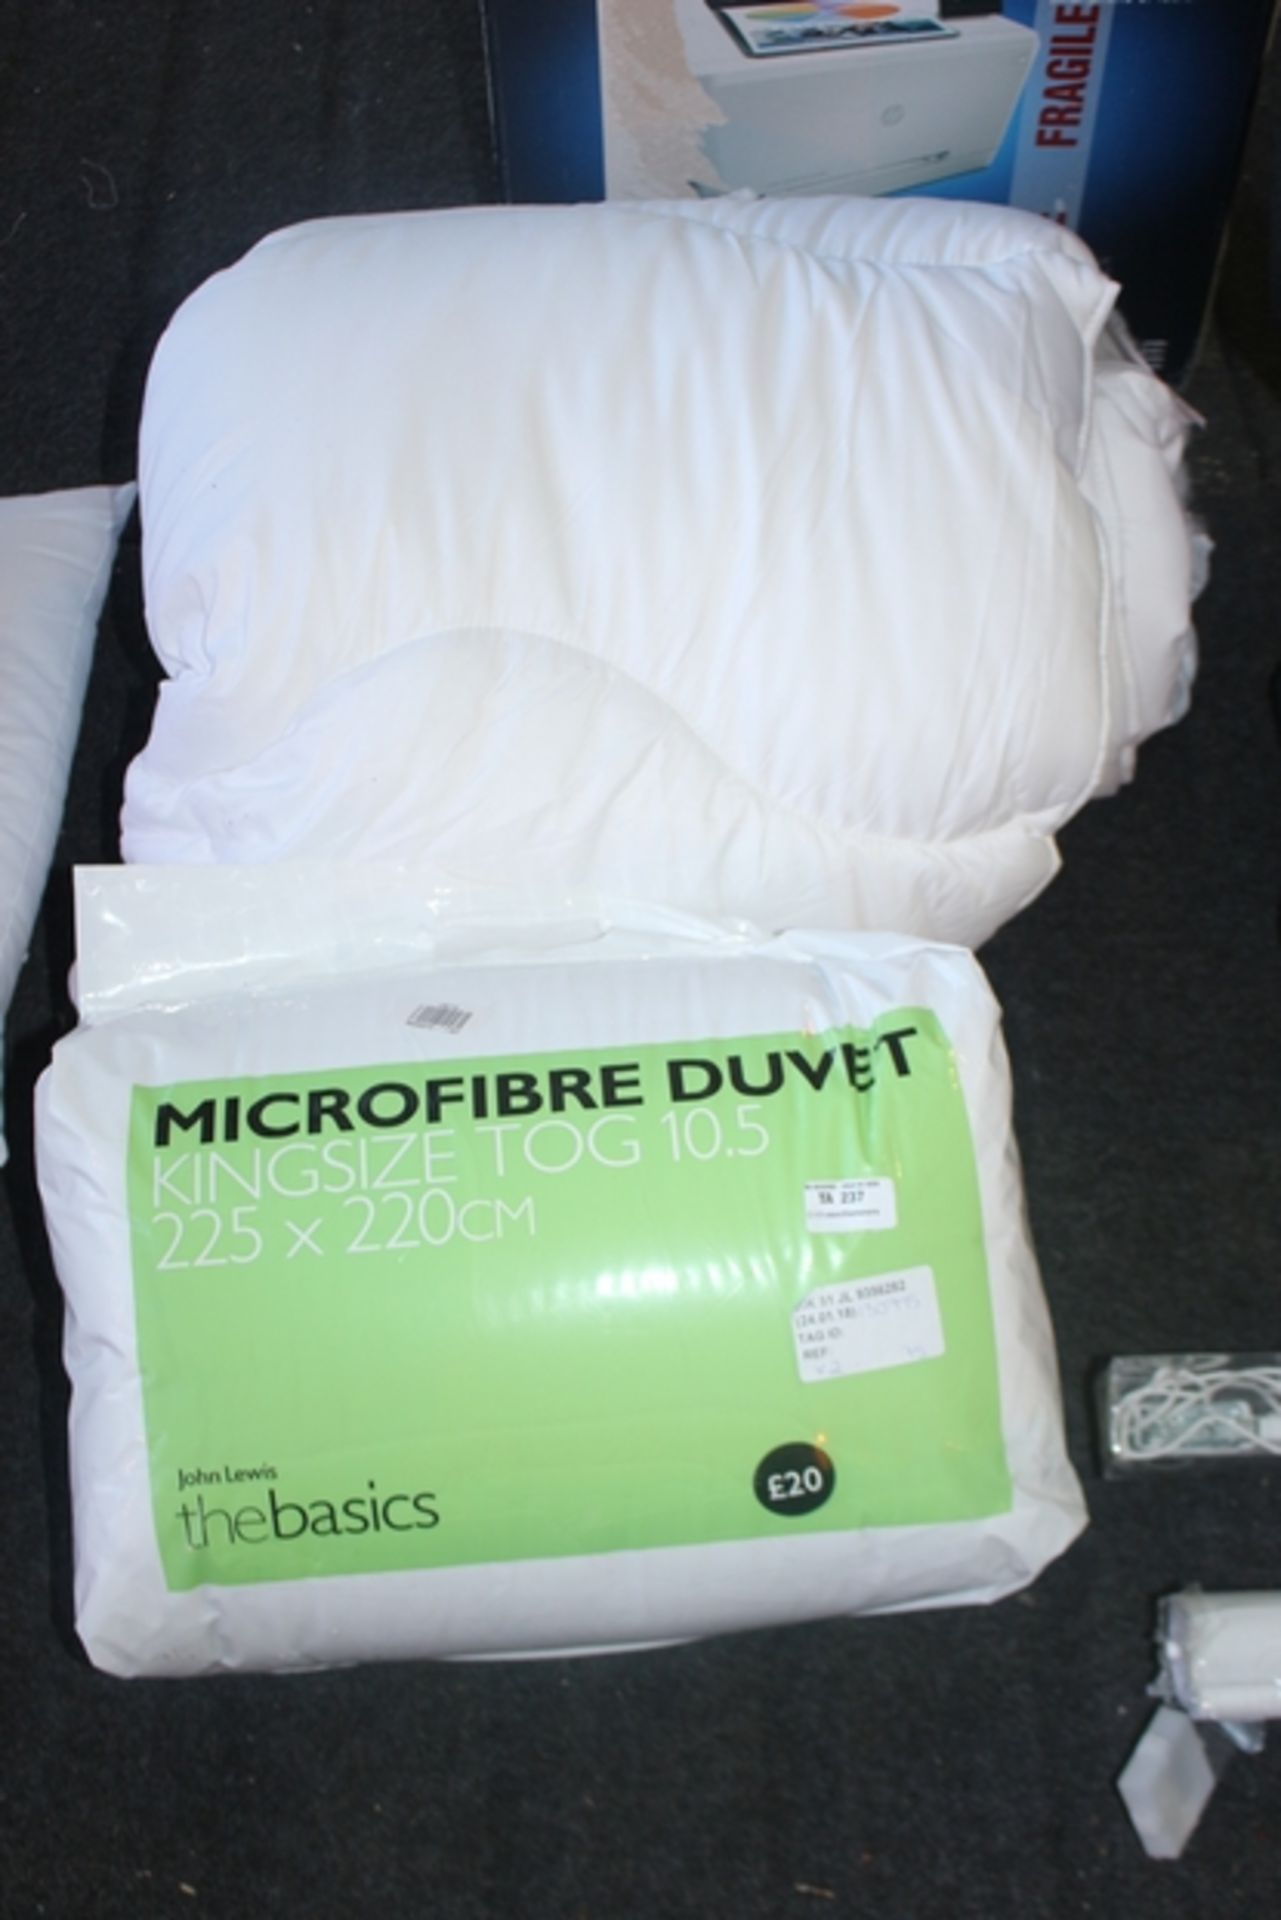 1X LOT TO CONTAIN 2 ITEMS TO INCLUDE A KING SIZE DUVET AND A MICROFIBRE KING SIZE DUVET COMBINED RRP